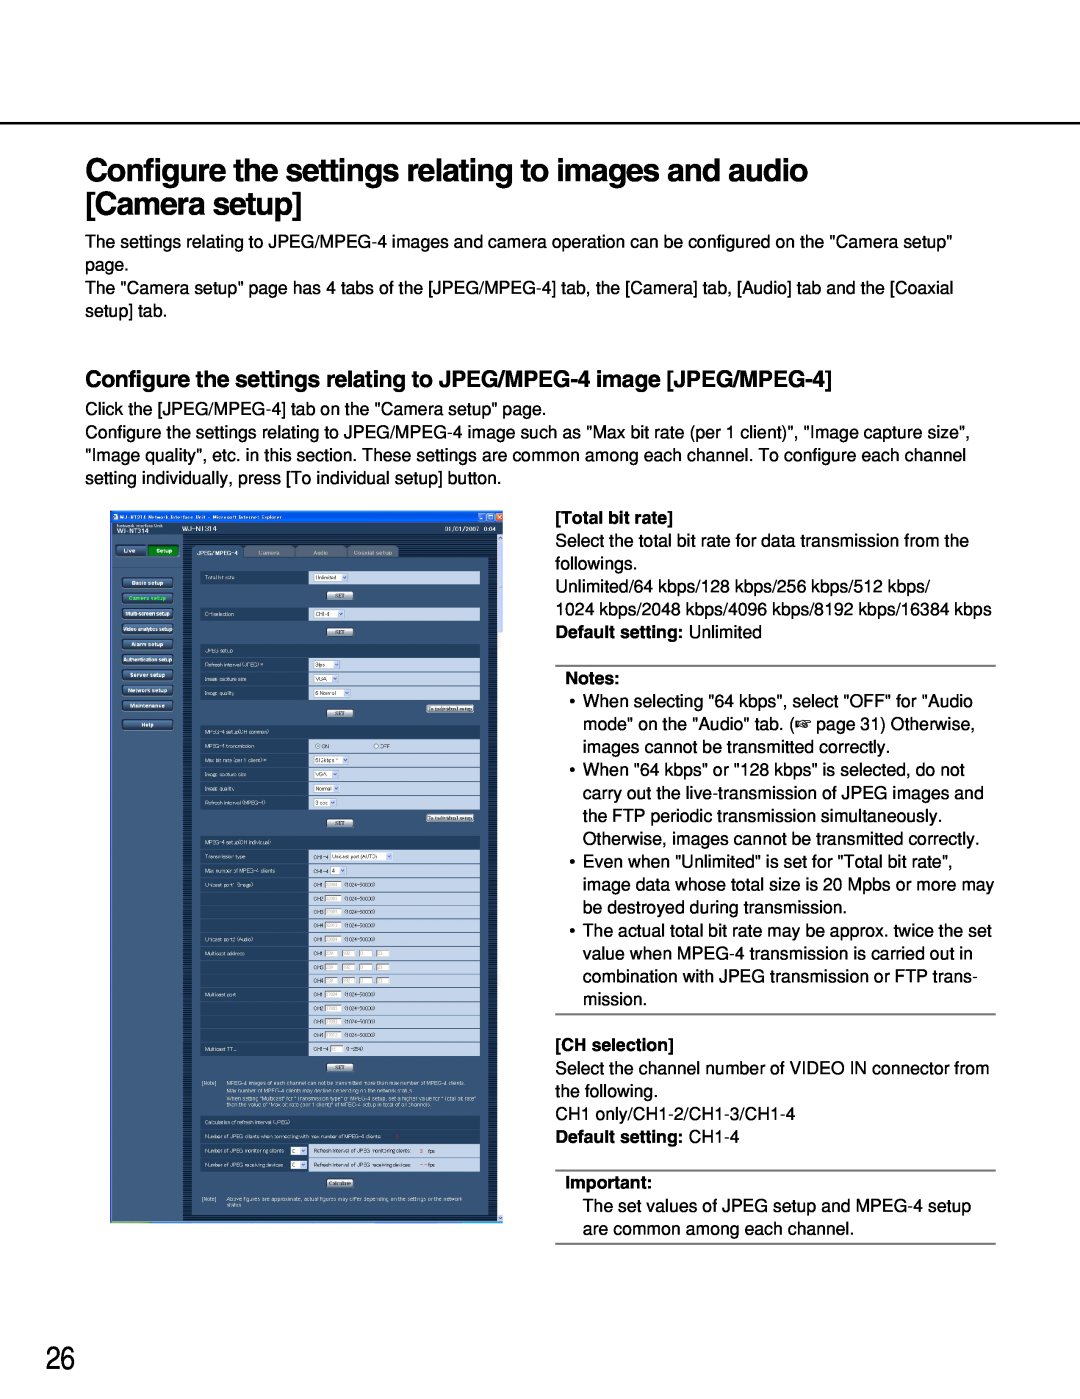 Panasonic WJ-NT314 manual Configure the settings relating to images and audio Camera setup, Total bit rate, CH selection 